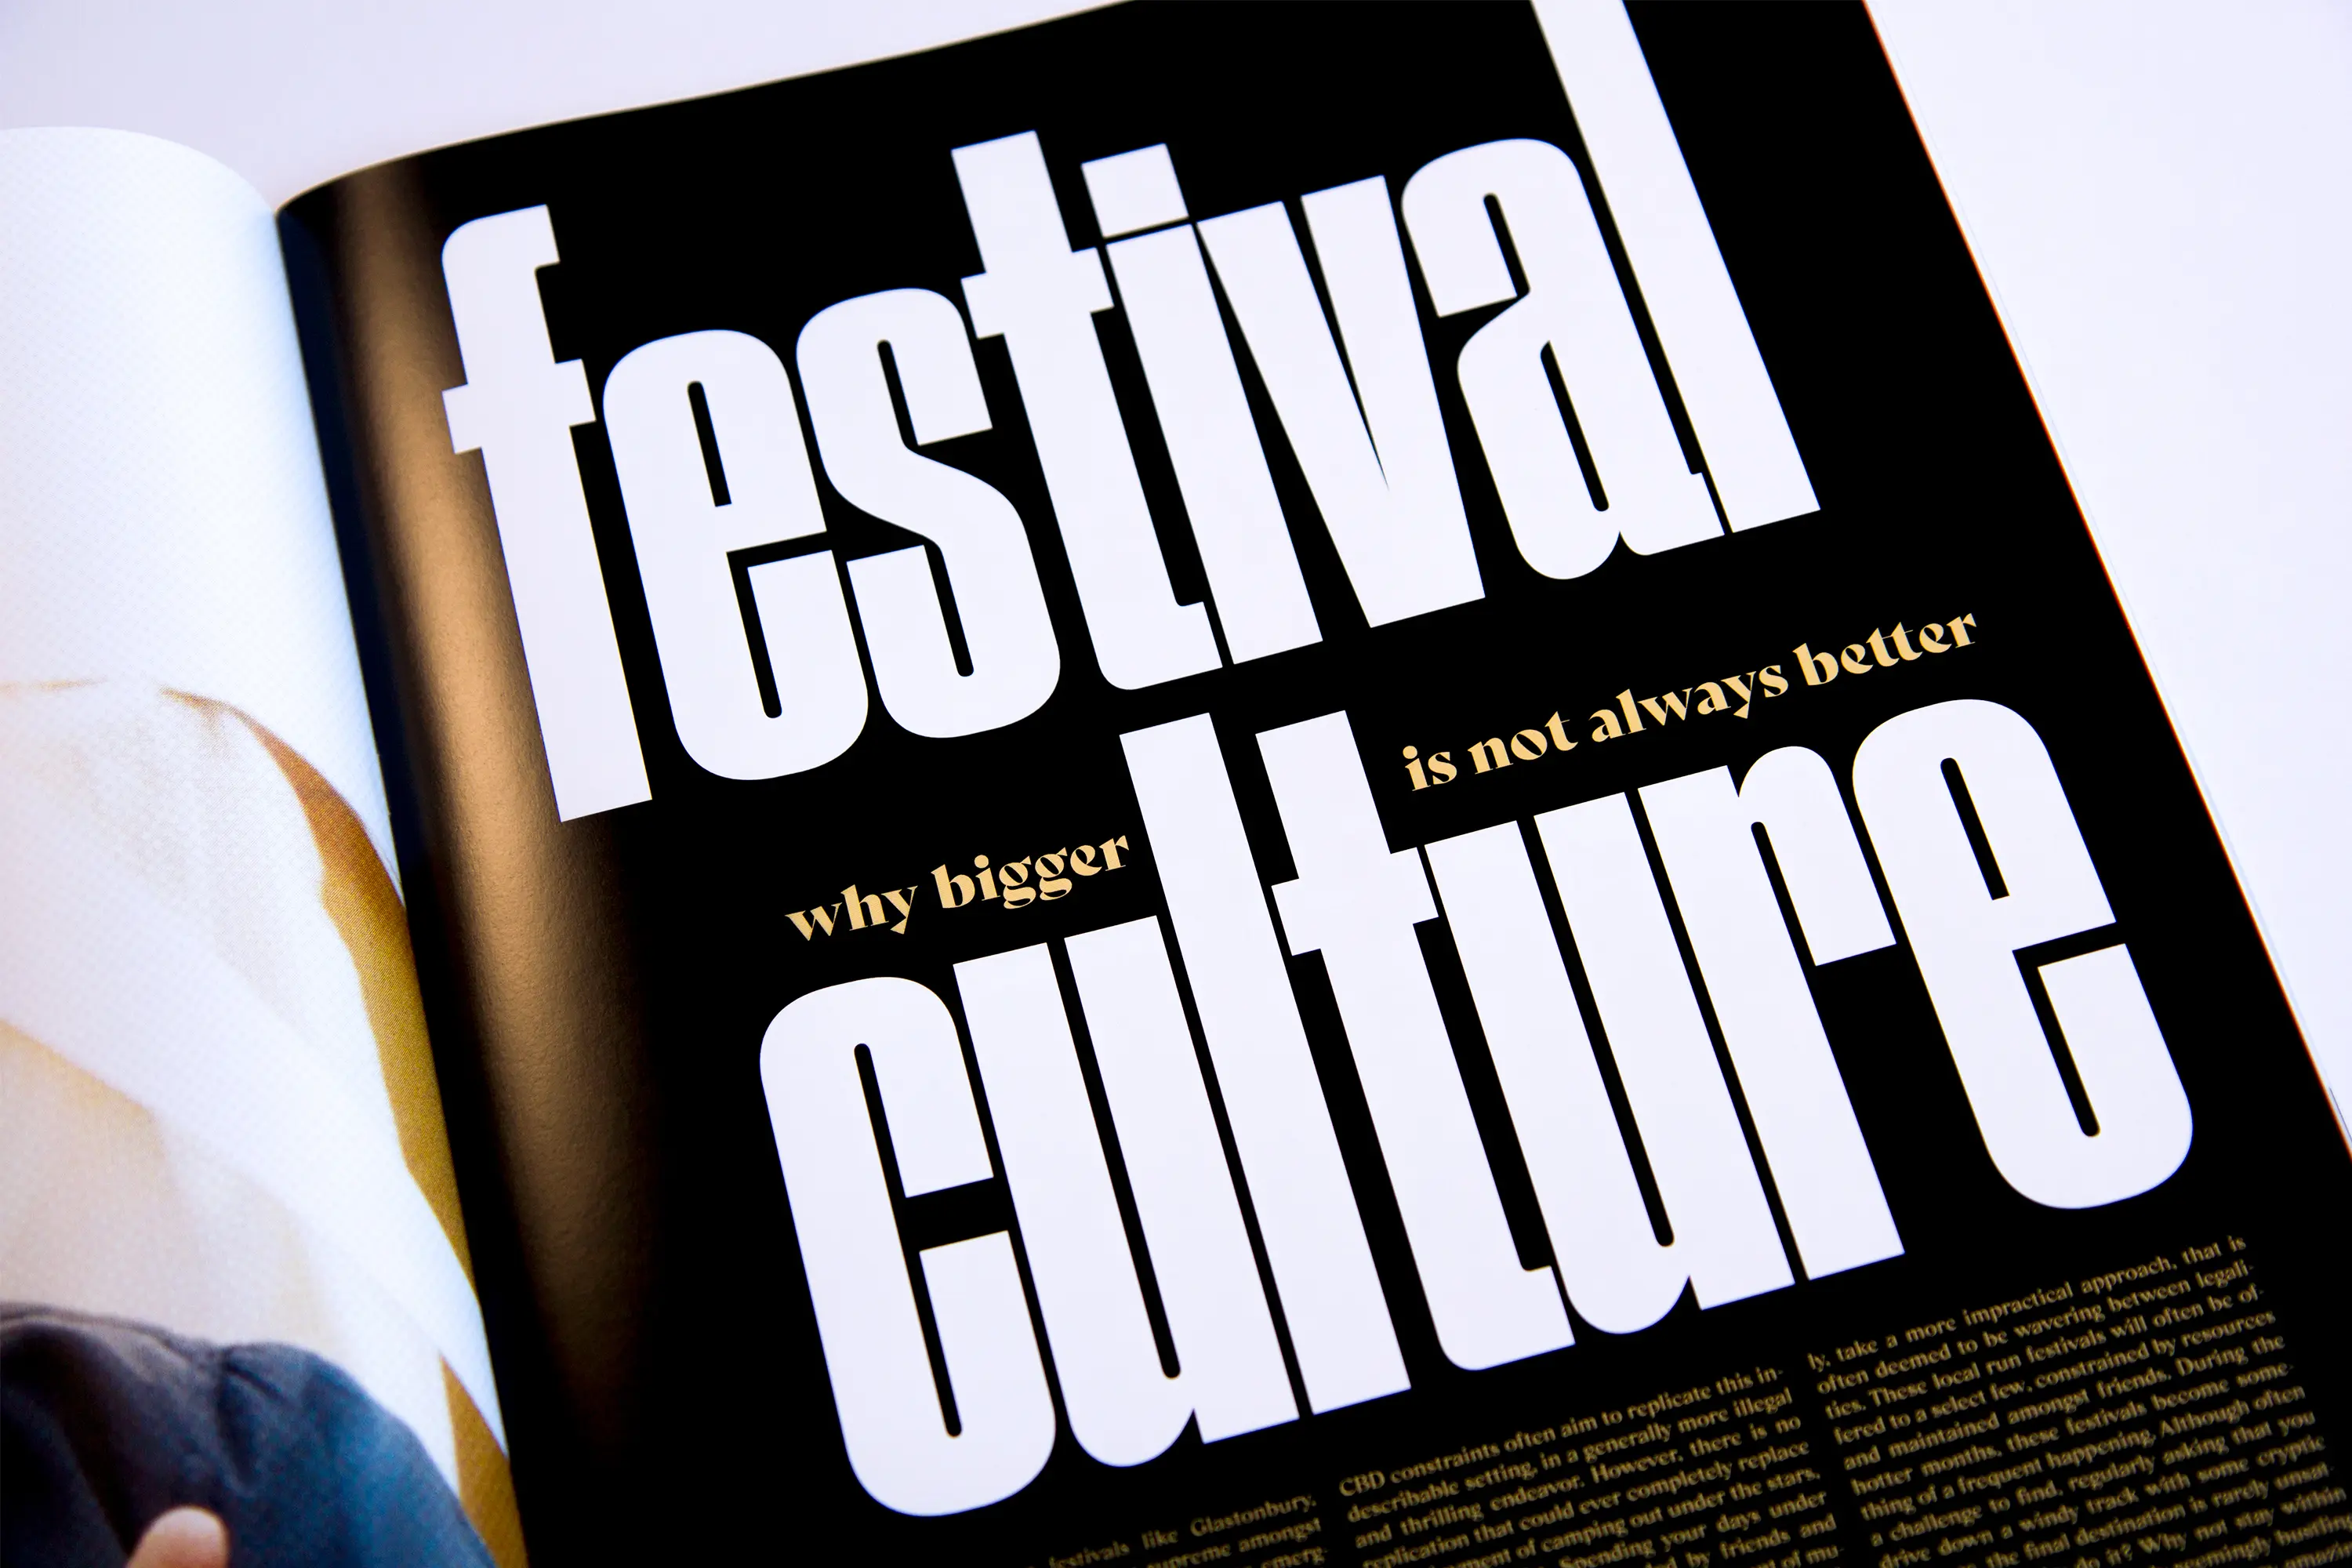 Resonate Magazine - page with large white text 'festival culture' on black background